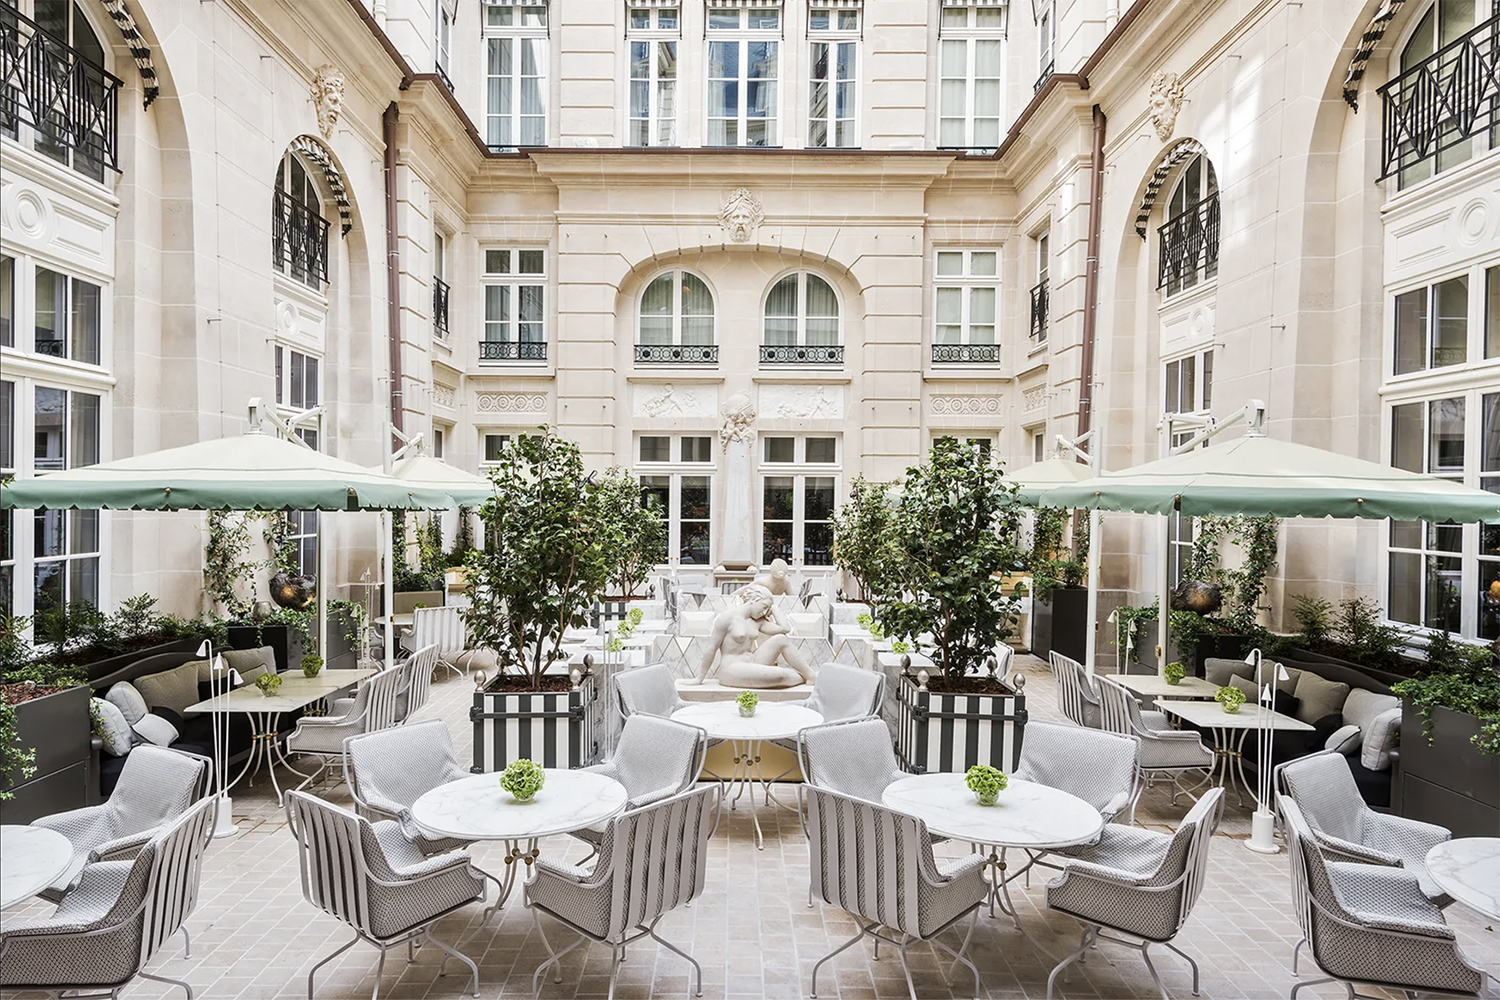 The inner courtyard restaurant of Hotel de Crillon in Paris with white and gray furniture and pastel green umbrellas